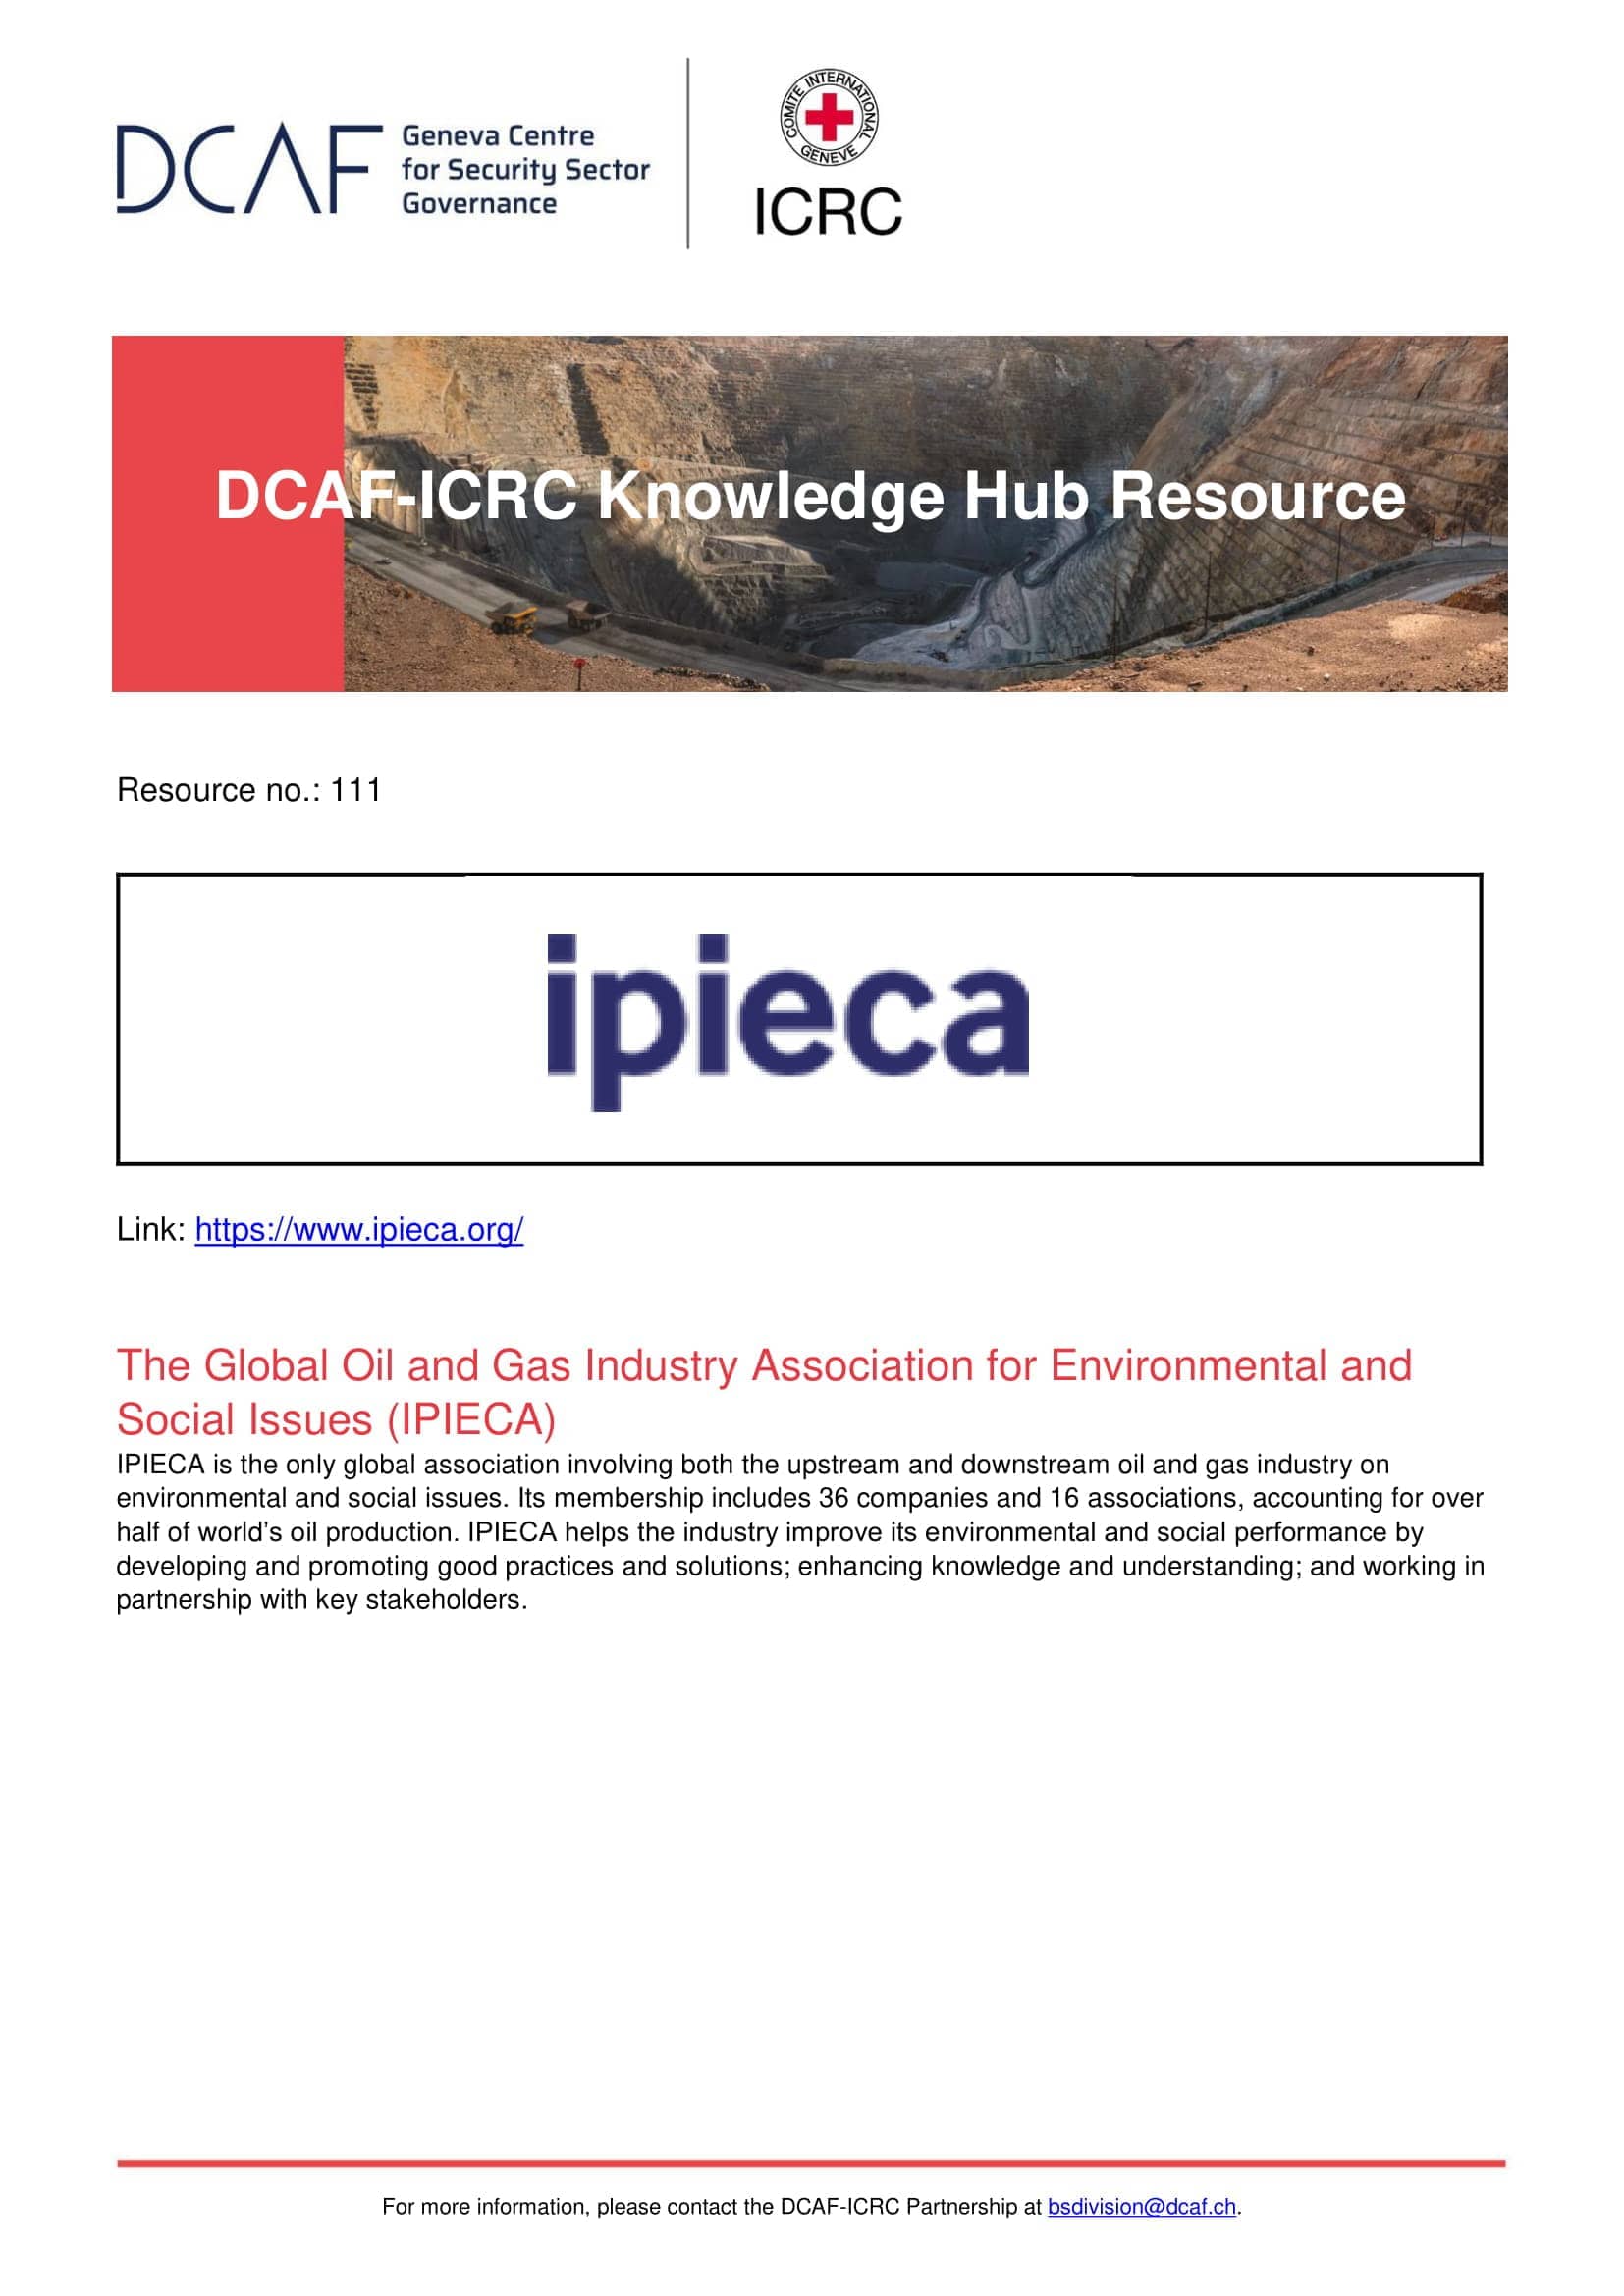 The Global Oil and Gas Industry Association for Environmental and Social Issues (IPIECA)